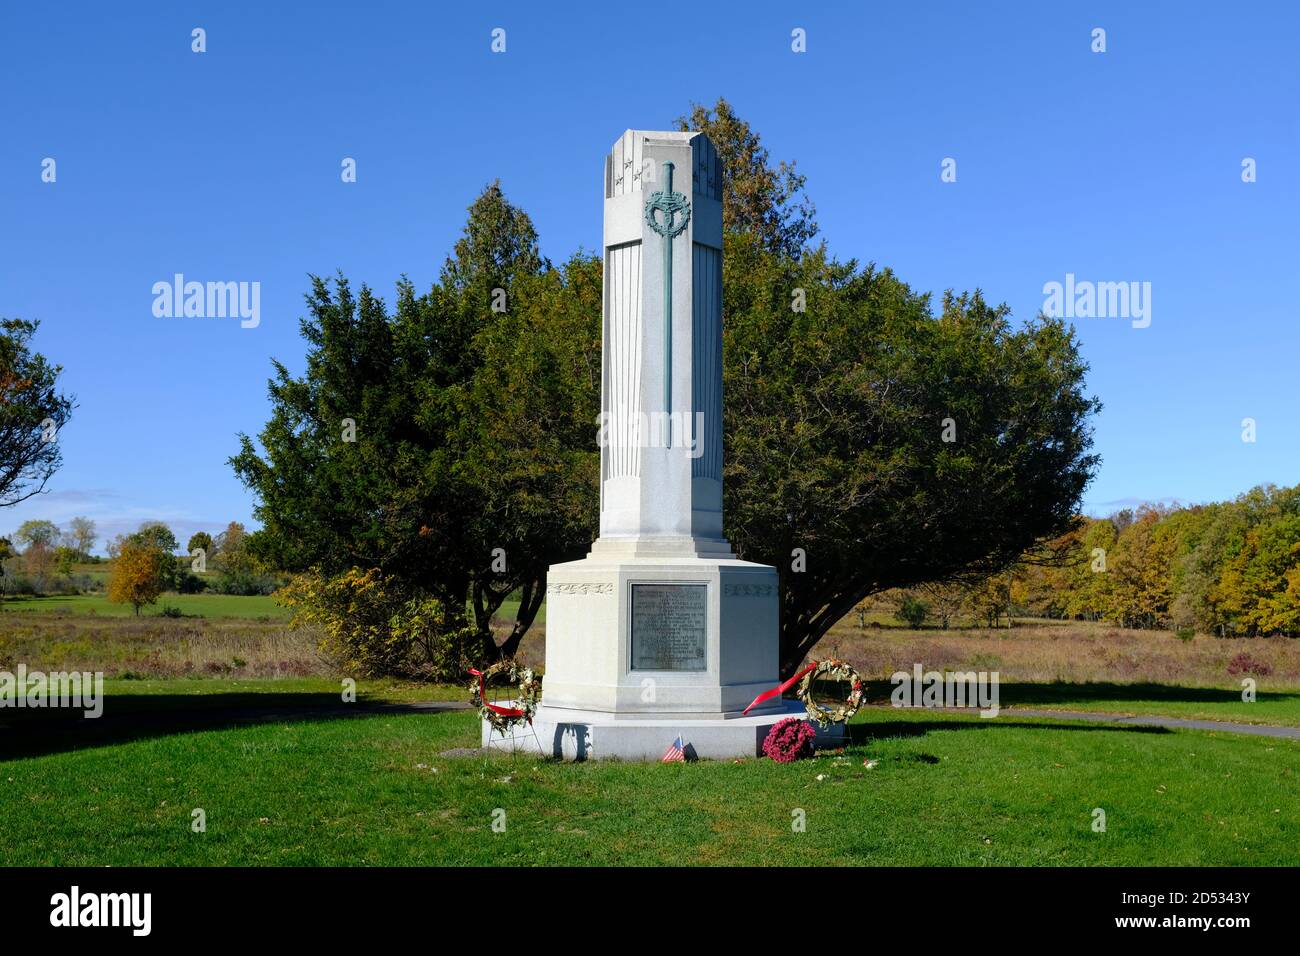 Monument to unknown soldiers, dedicated by the DAR in 1931, in Saratoga National Historical Park Stock Photo